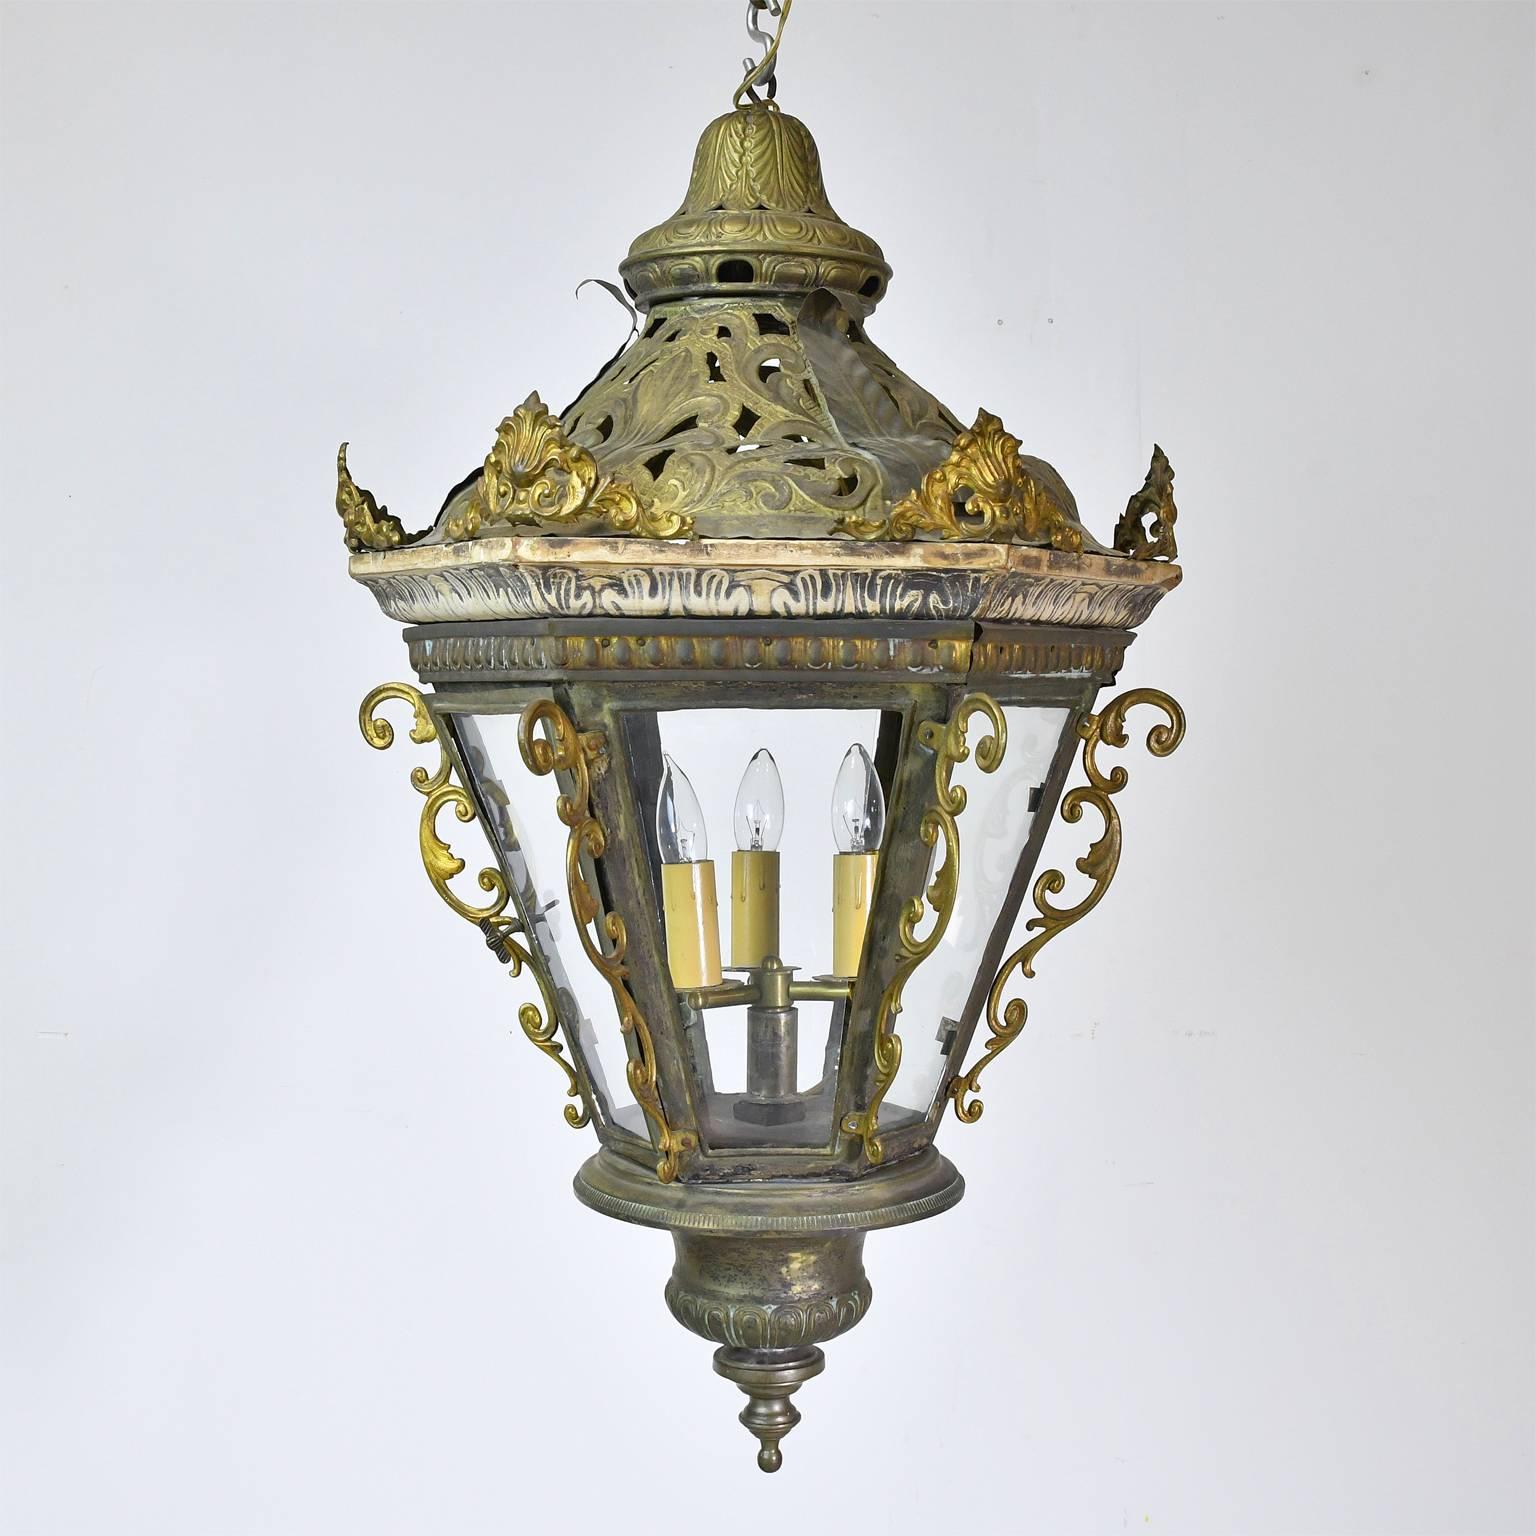 A very beautiful and highly decorative pair of Baroque style Belle Époque Gondola Lanterns from Venice in hand-cut and hand-hammered metal with some cast elements, gesso and brass decorative details. Converted to electric, Italy, circa late